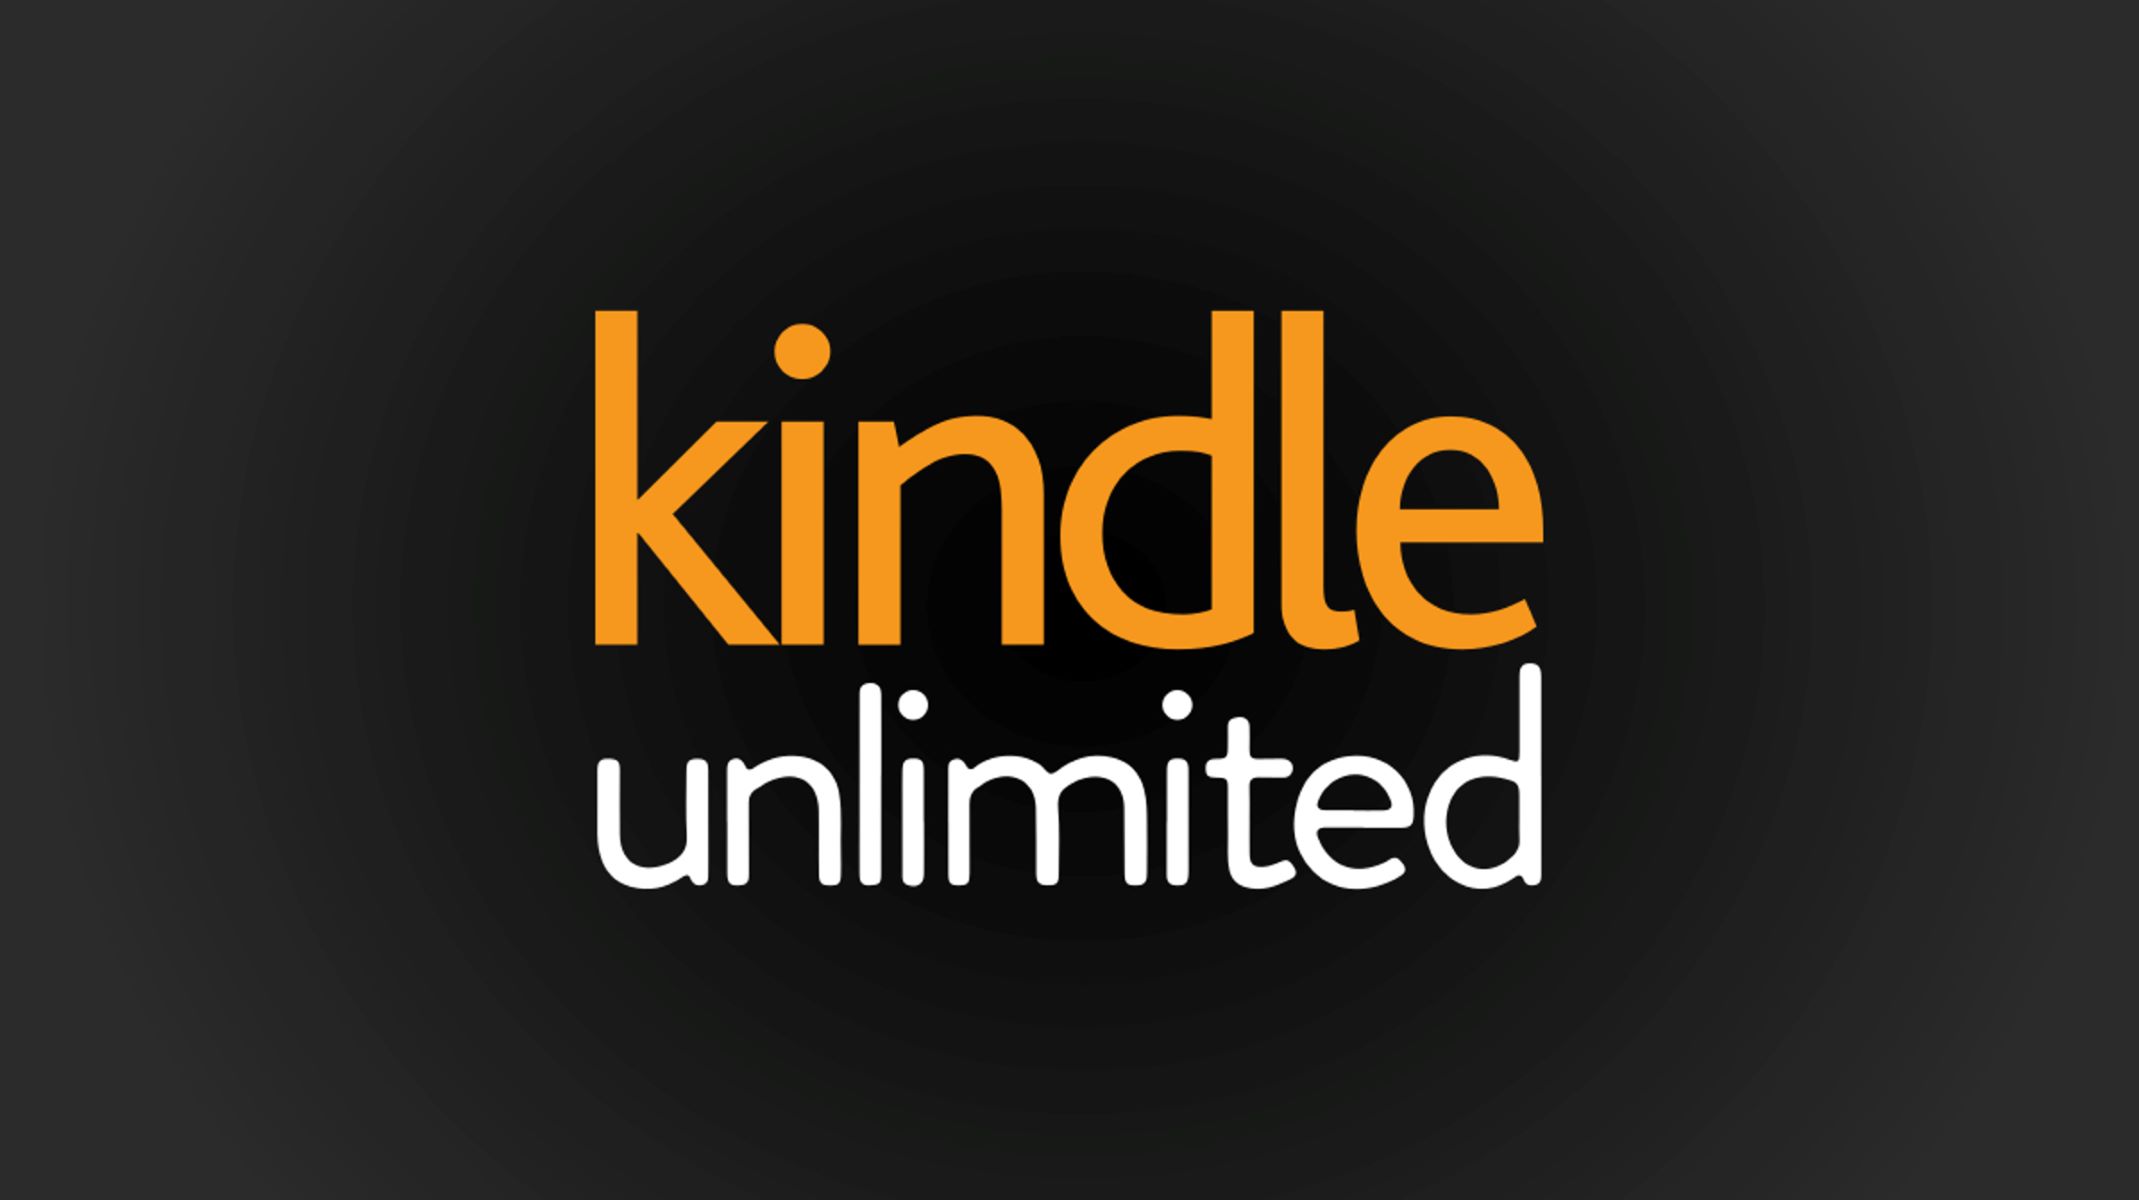 How Many Books Can I Borrow On Kindle Unlimited